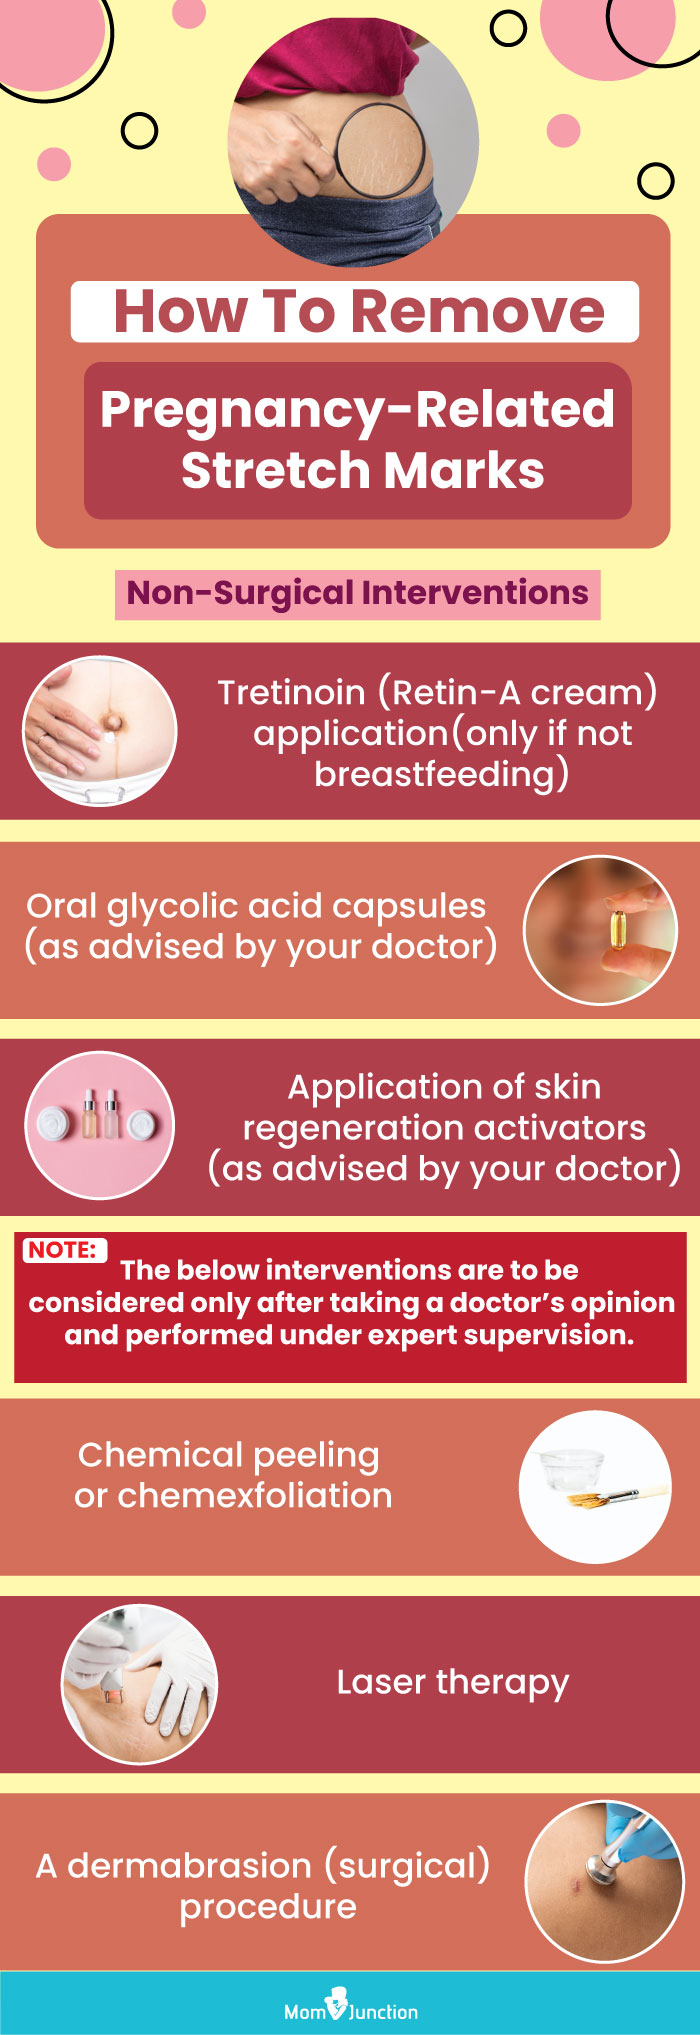 how to remove pregnancy related stretch marks (infographic)